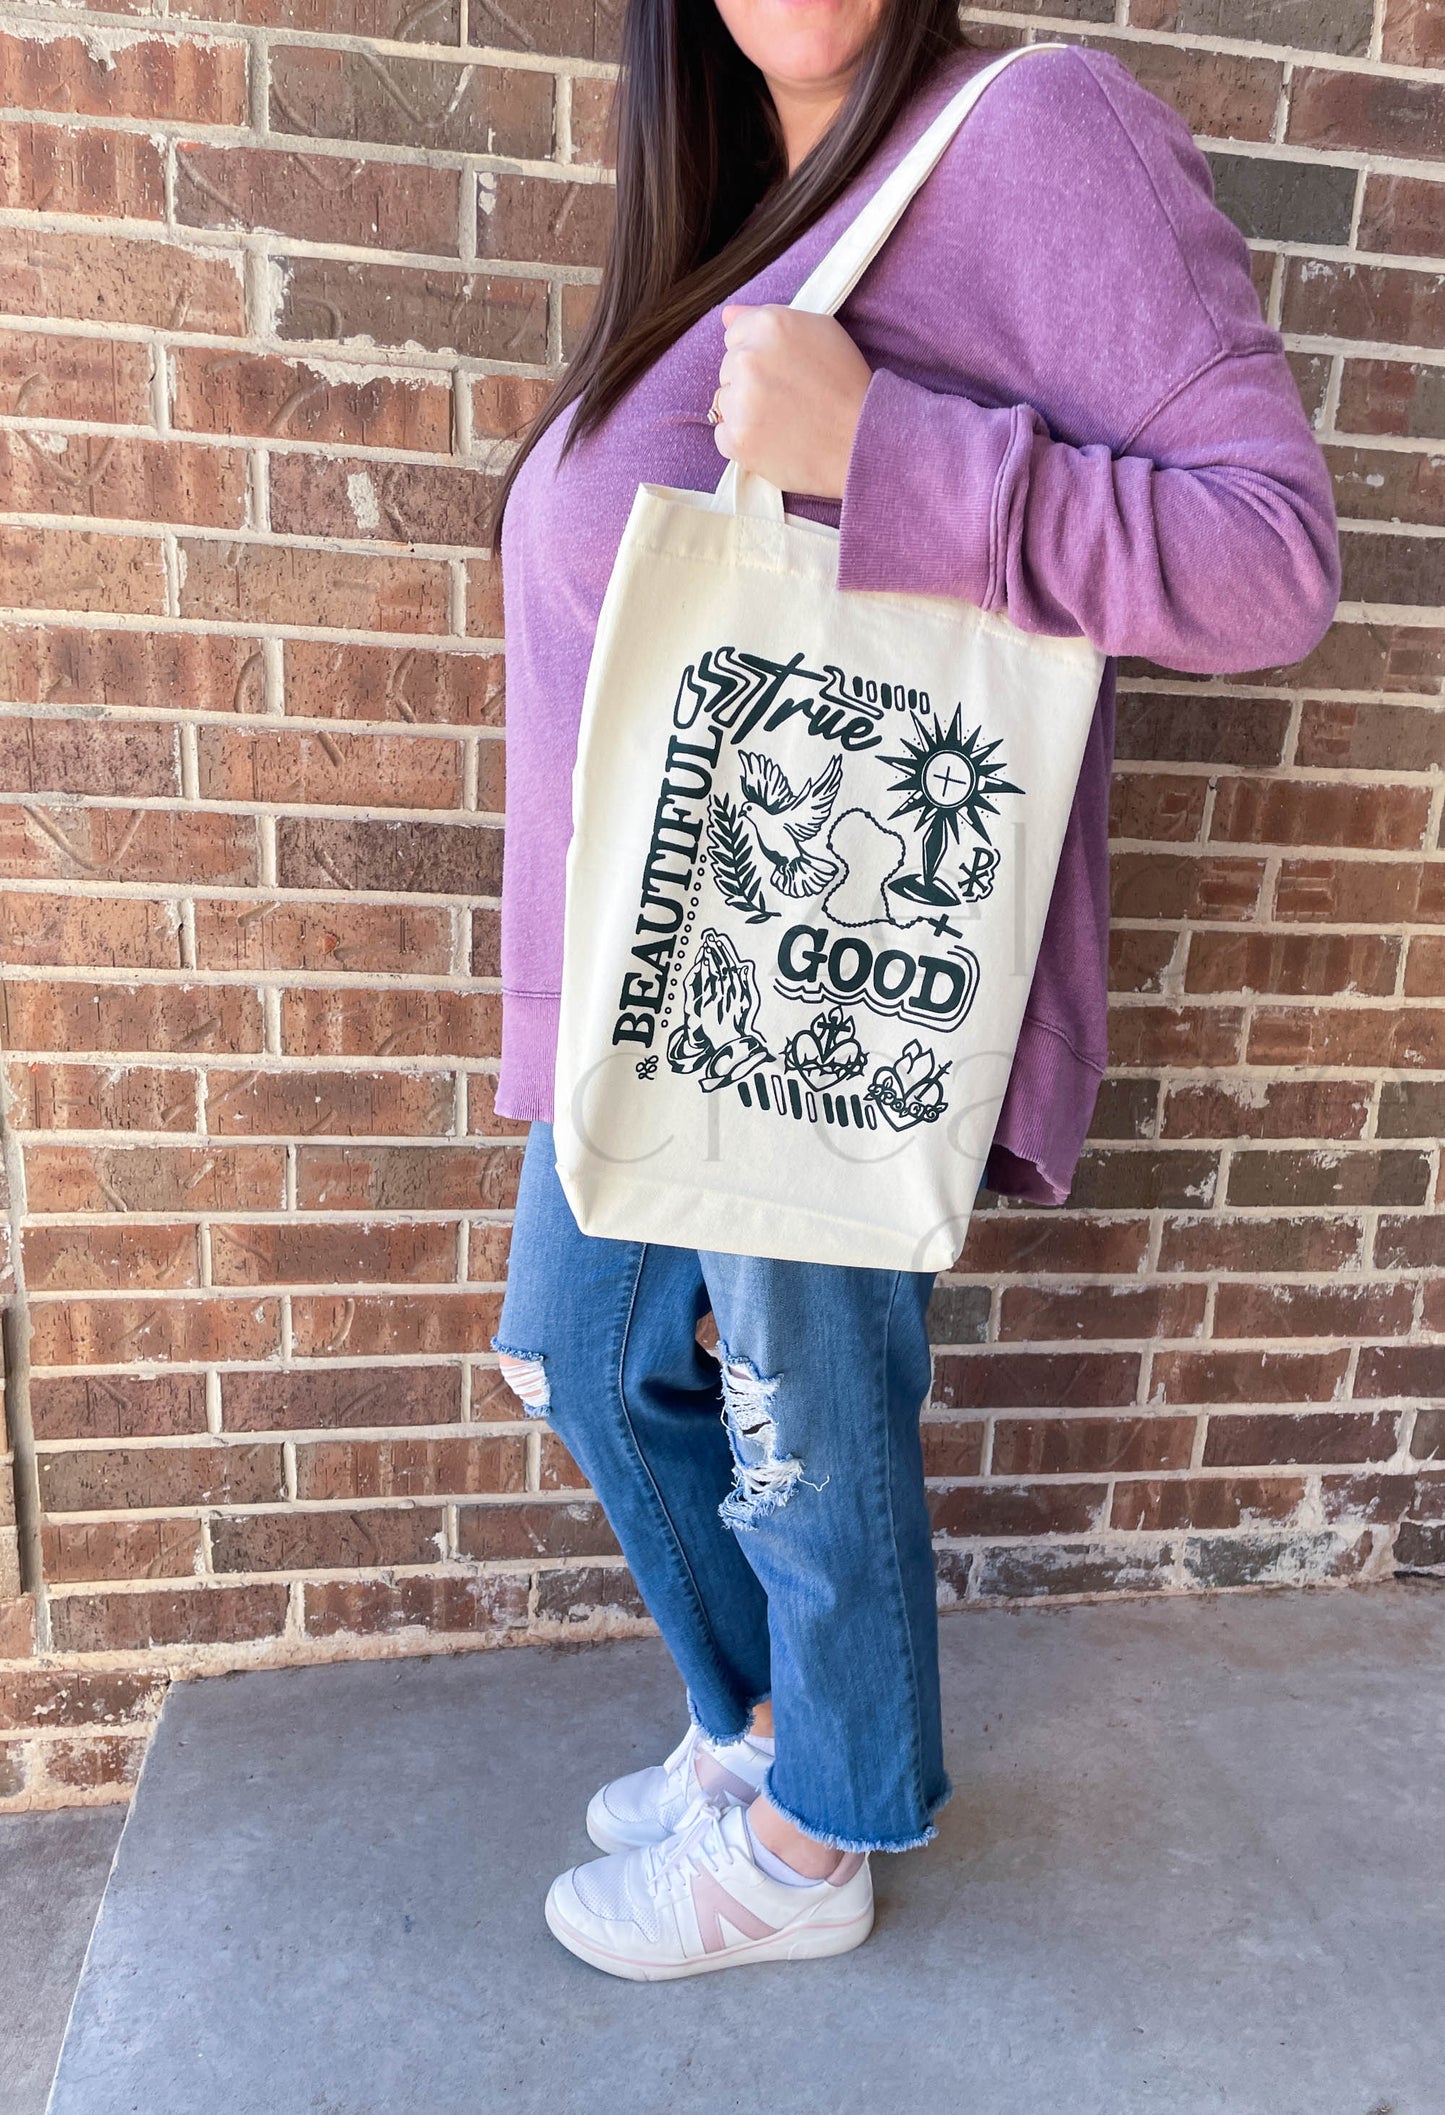 True, Good, and Beautiful | Canvas Tote Bag